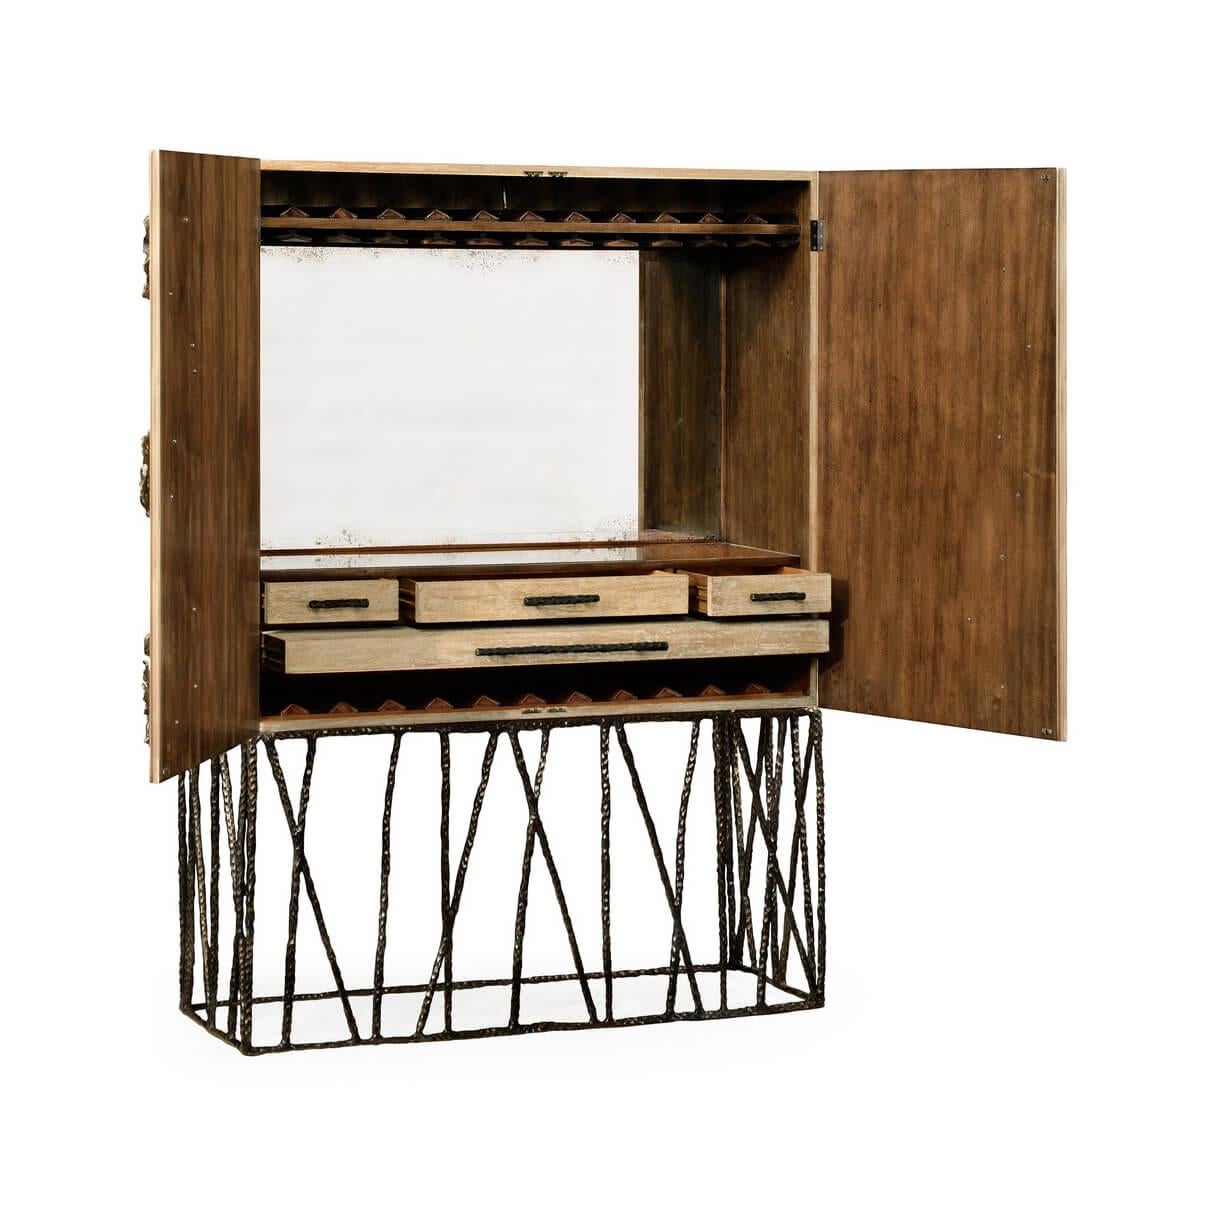 Spectacular limed wood and walnut lined drinks cabinet with hammered bronzed openwork base and abstract leaf details to the doors. Inspired by European luxury furniture of the 1940s.

Dimensions: 47 3/4